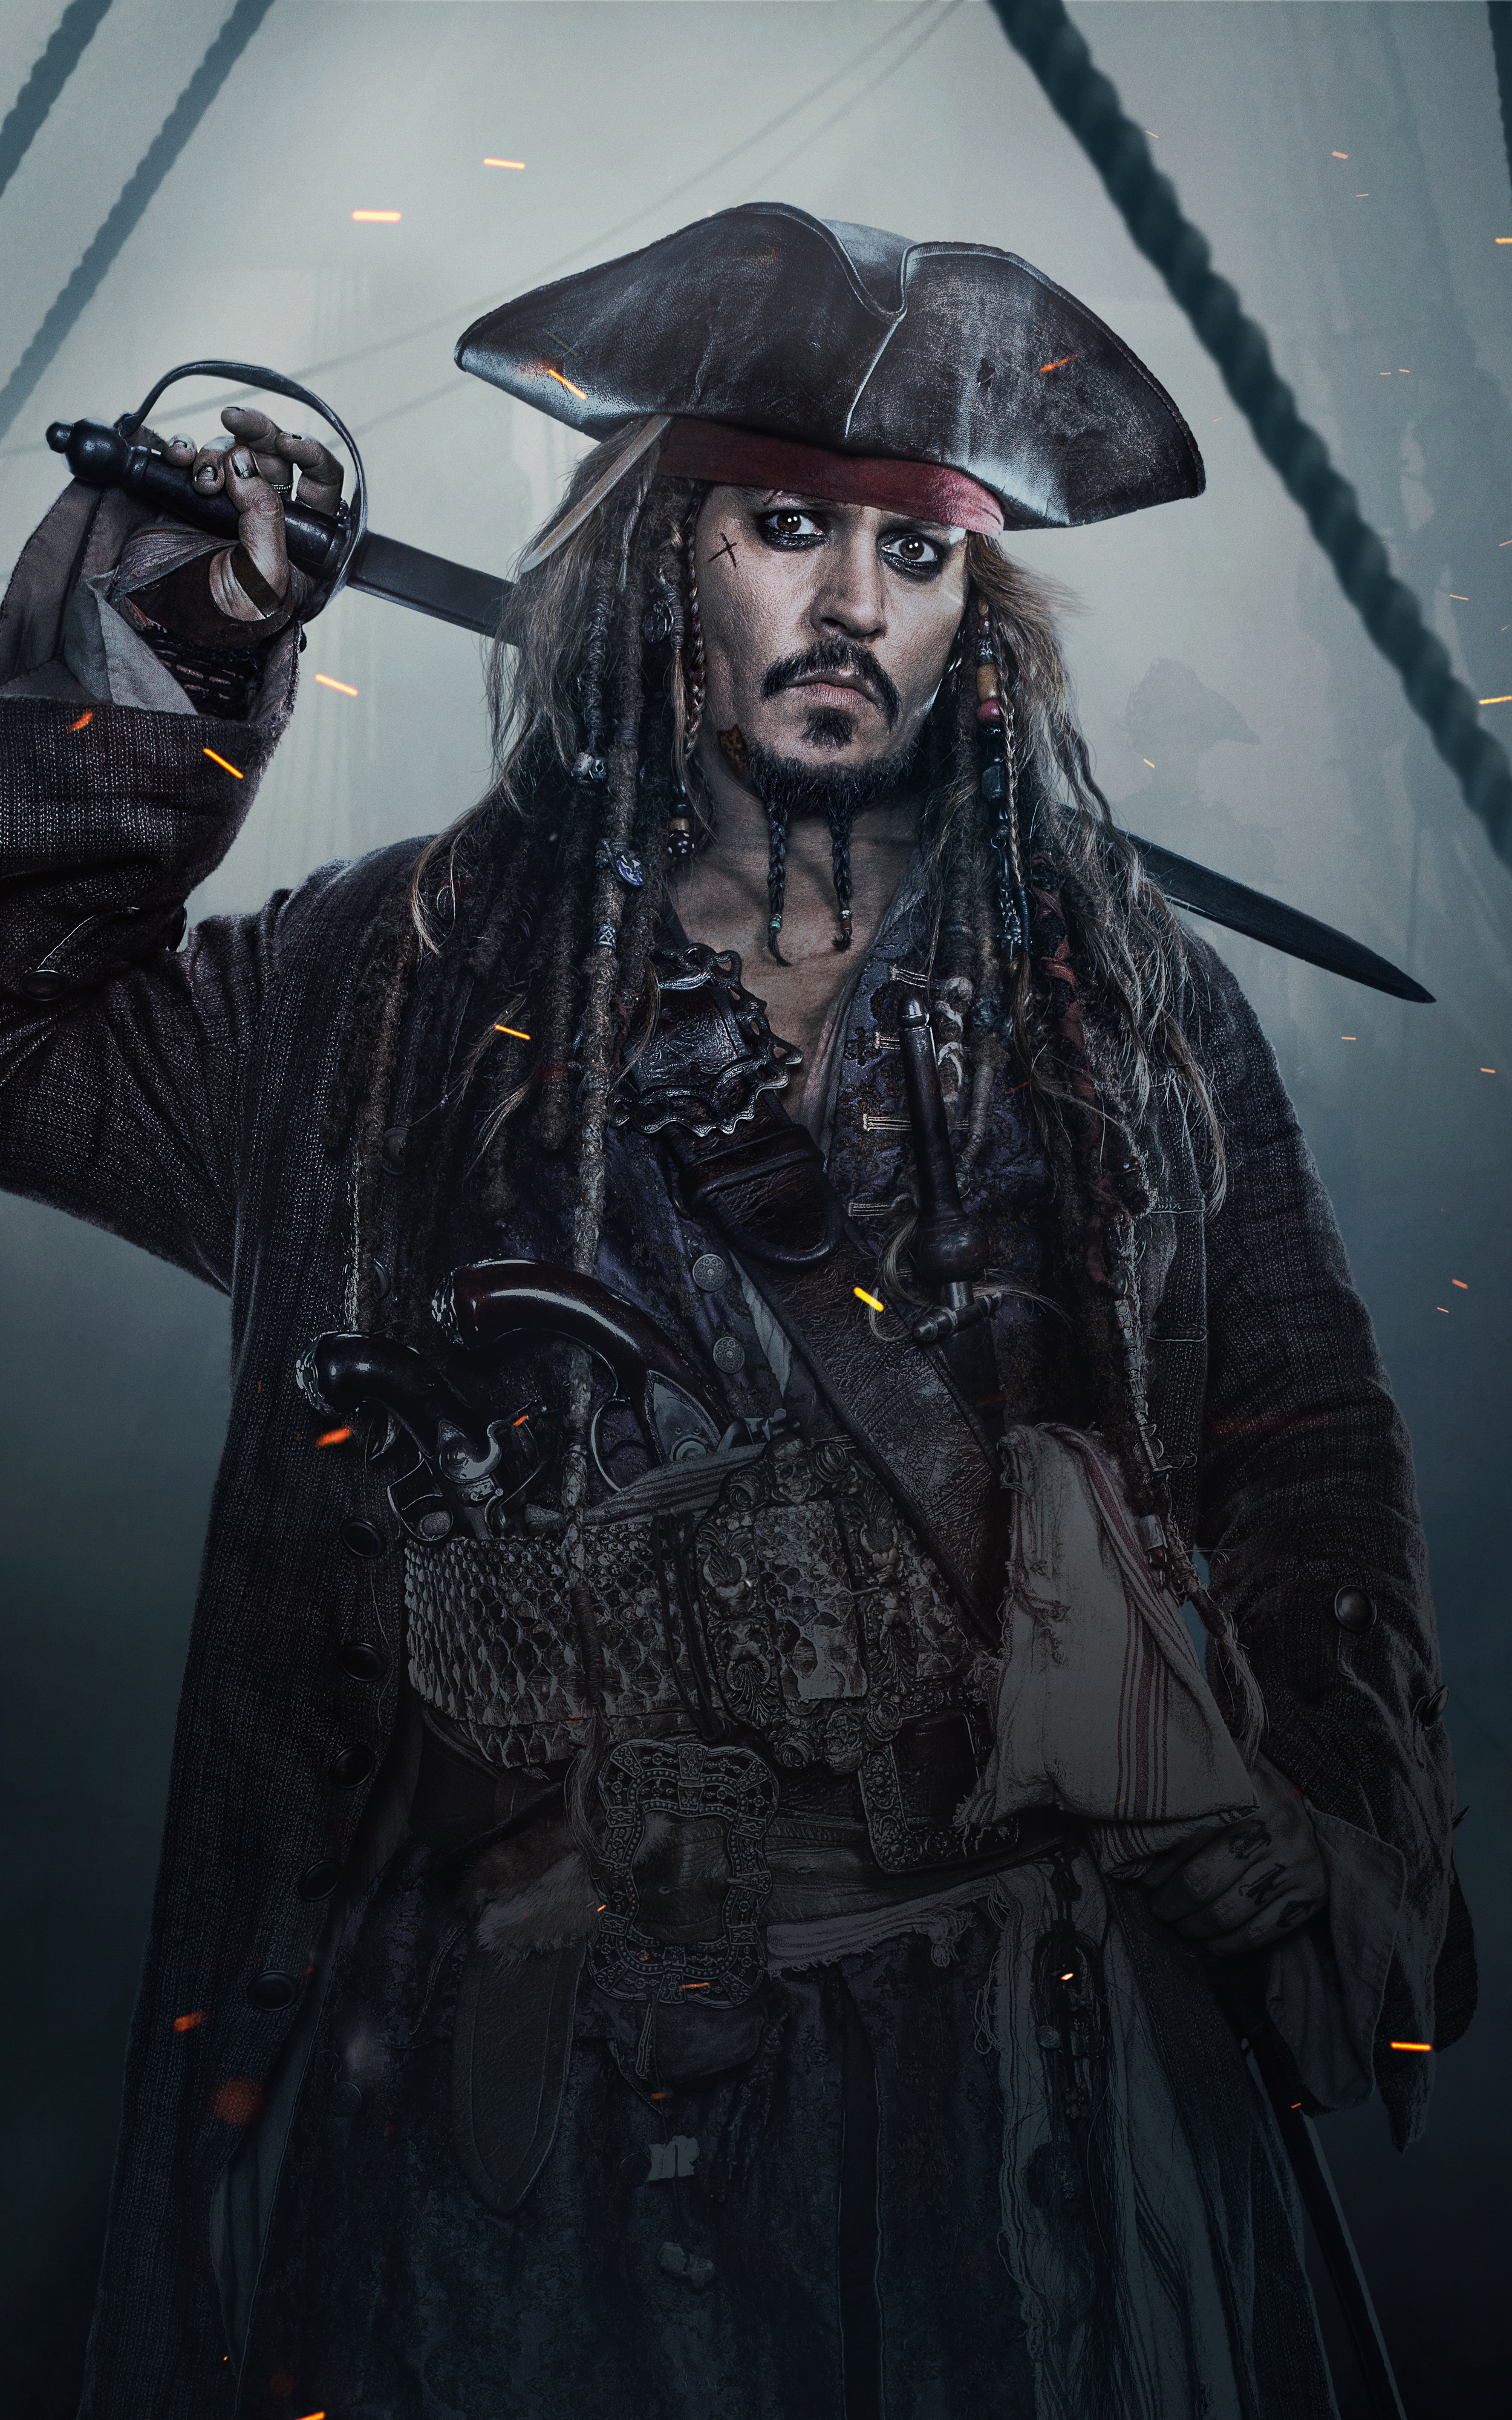 Incredible Compilation of Full 4K Jack Sparrow Images: Over 999 Pictures